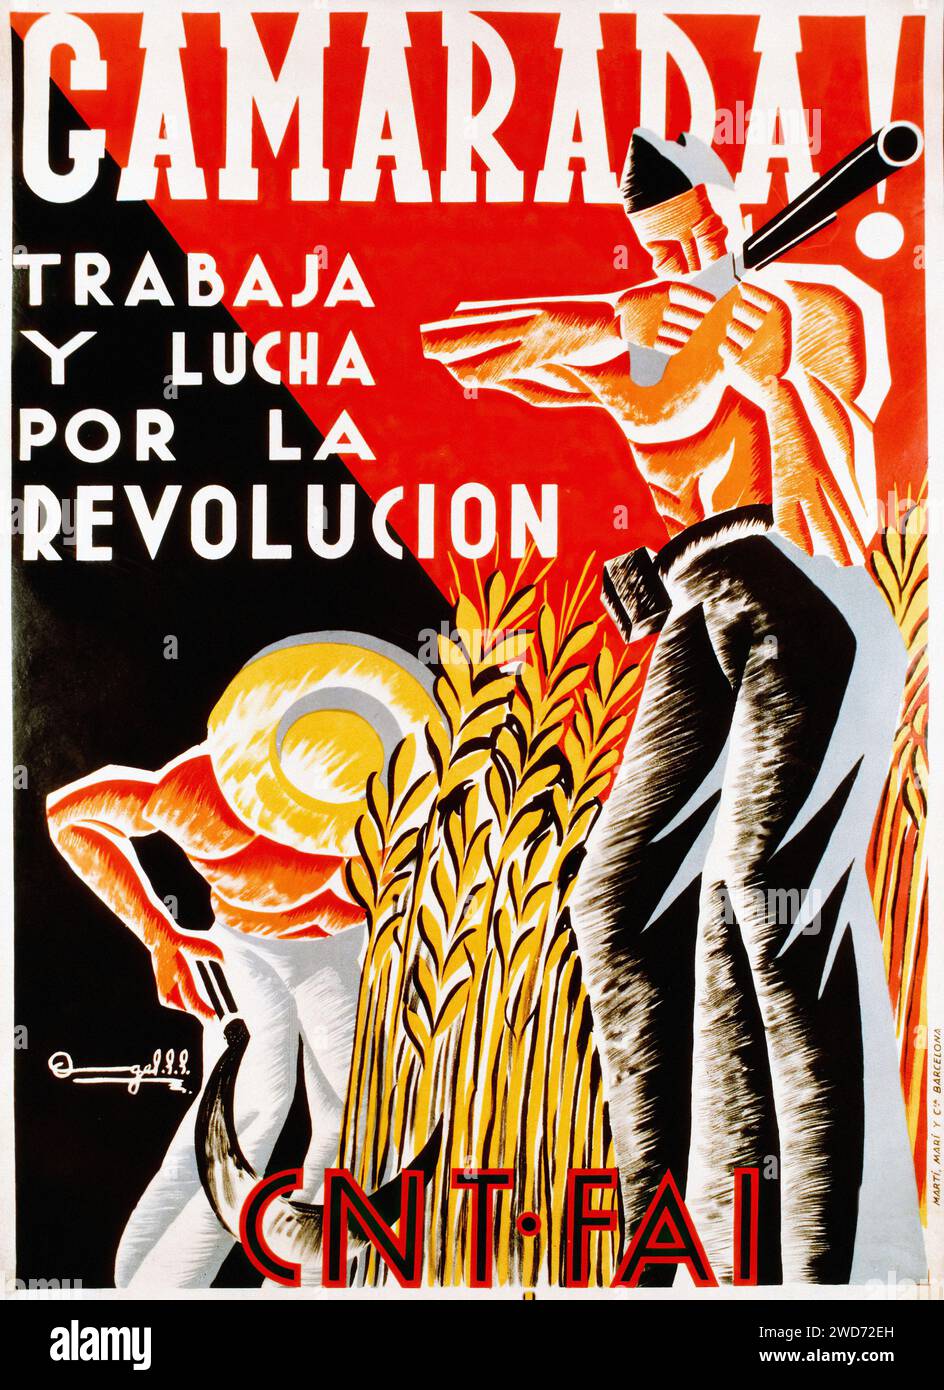 'Camarada! Trabaja y lucha por la Revolución' 'Comrade! Work and Fight for the Revolution' The poster depicts a soldier in action, with agricultural elements, symbolizing the union of military and labor efforts. The style is propagandistic with dynamic composition and vibrant colors. - Spanish Civil War (Guerra Civil Española) Propaganda Poster Stock Photo